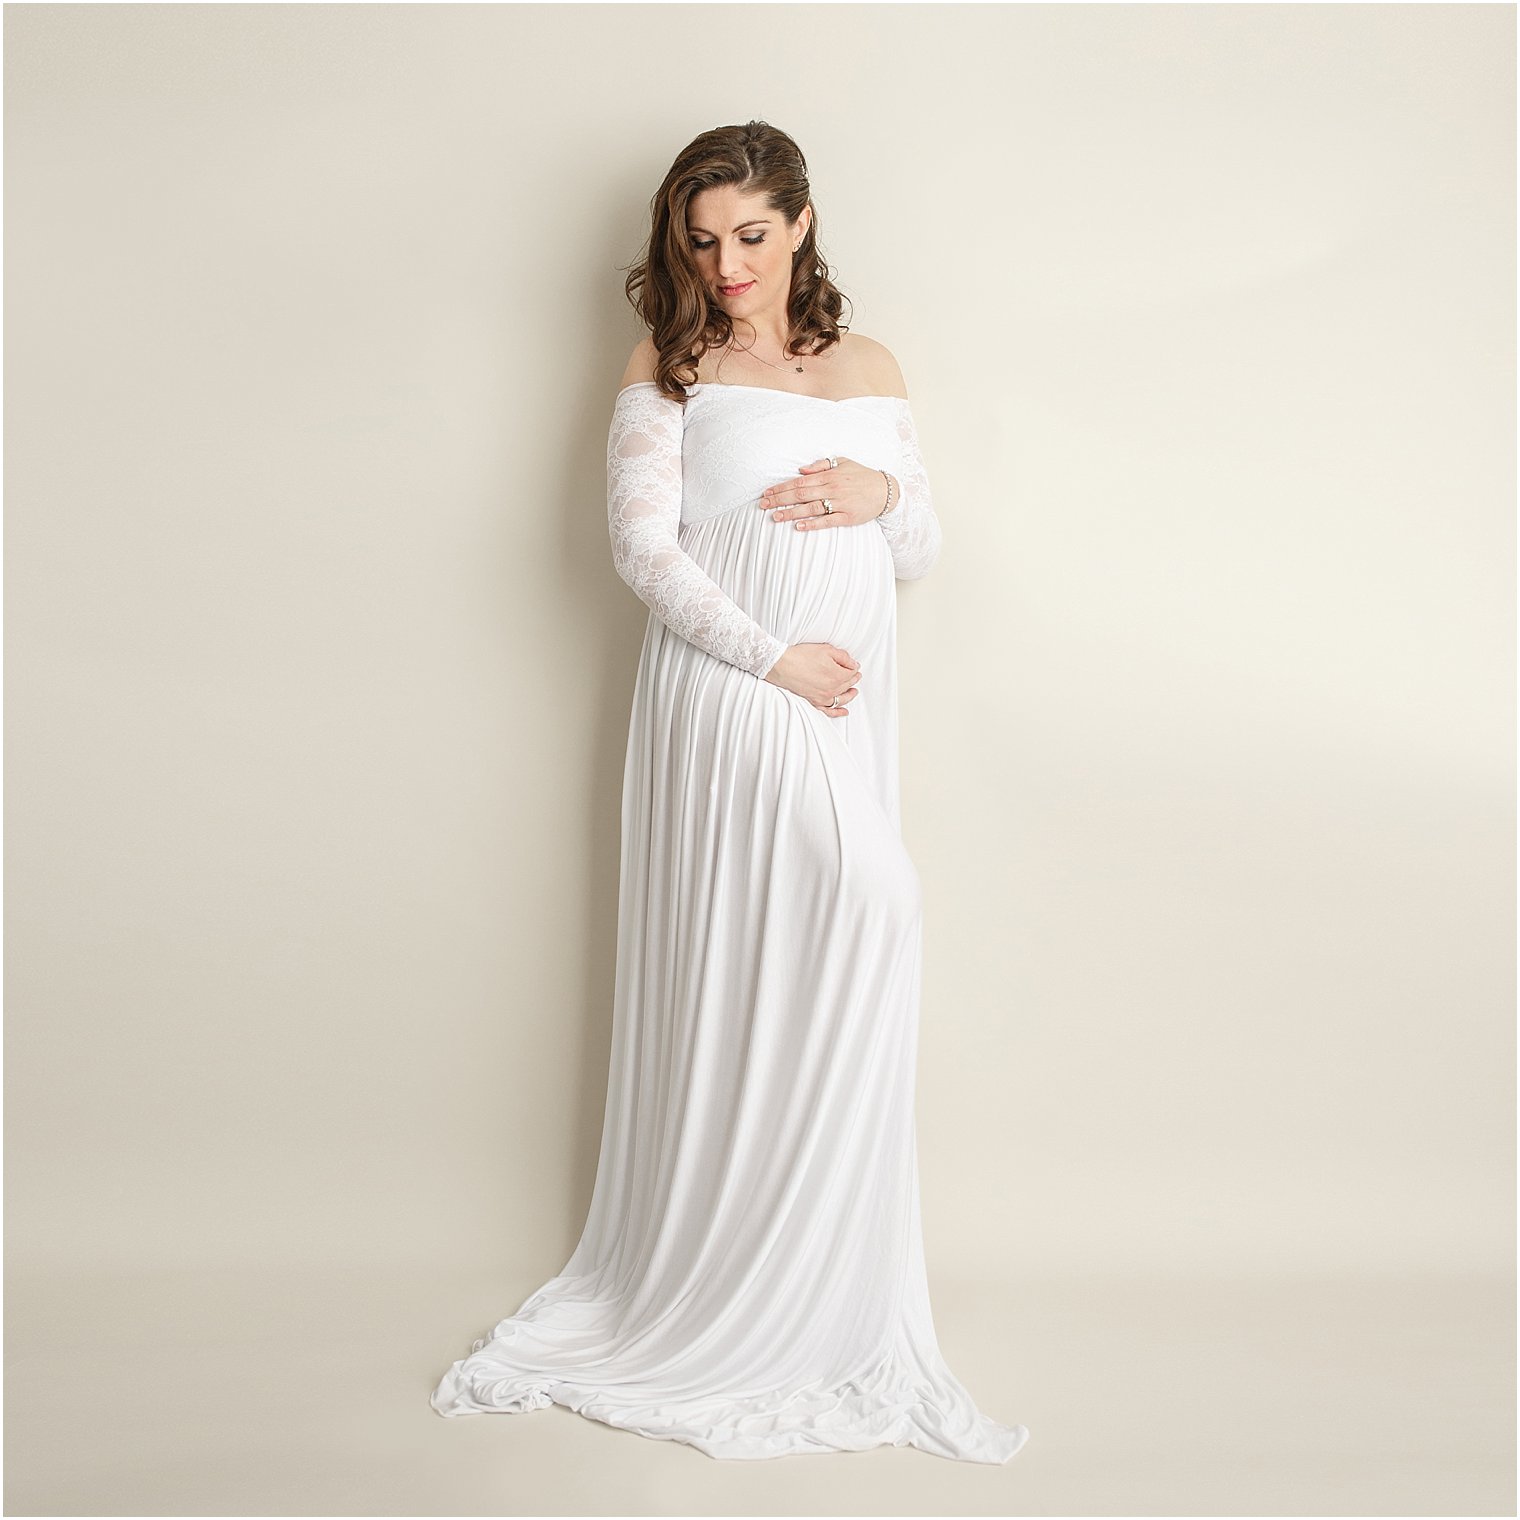 Expecting mother wearing maternity gown from Sew Trendy Accessories